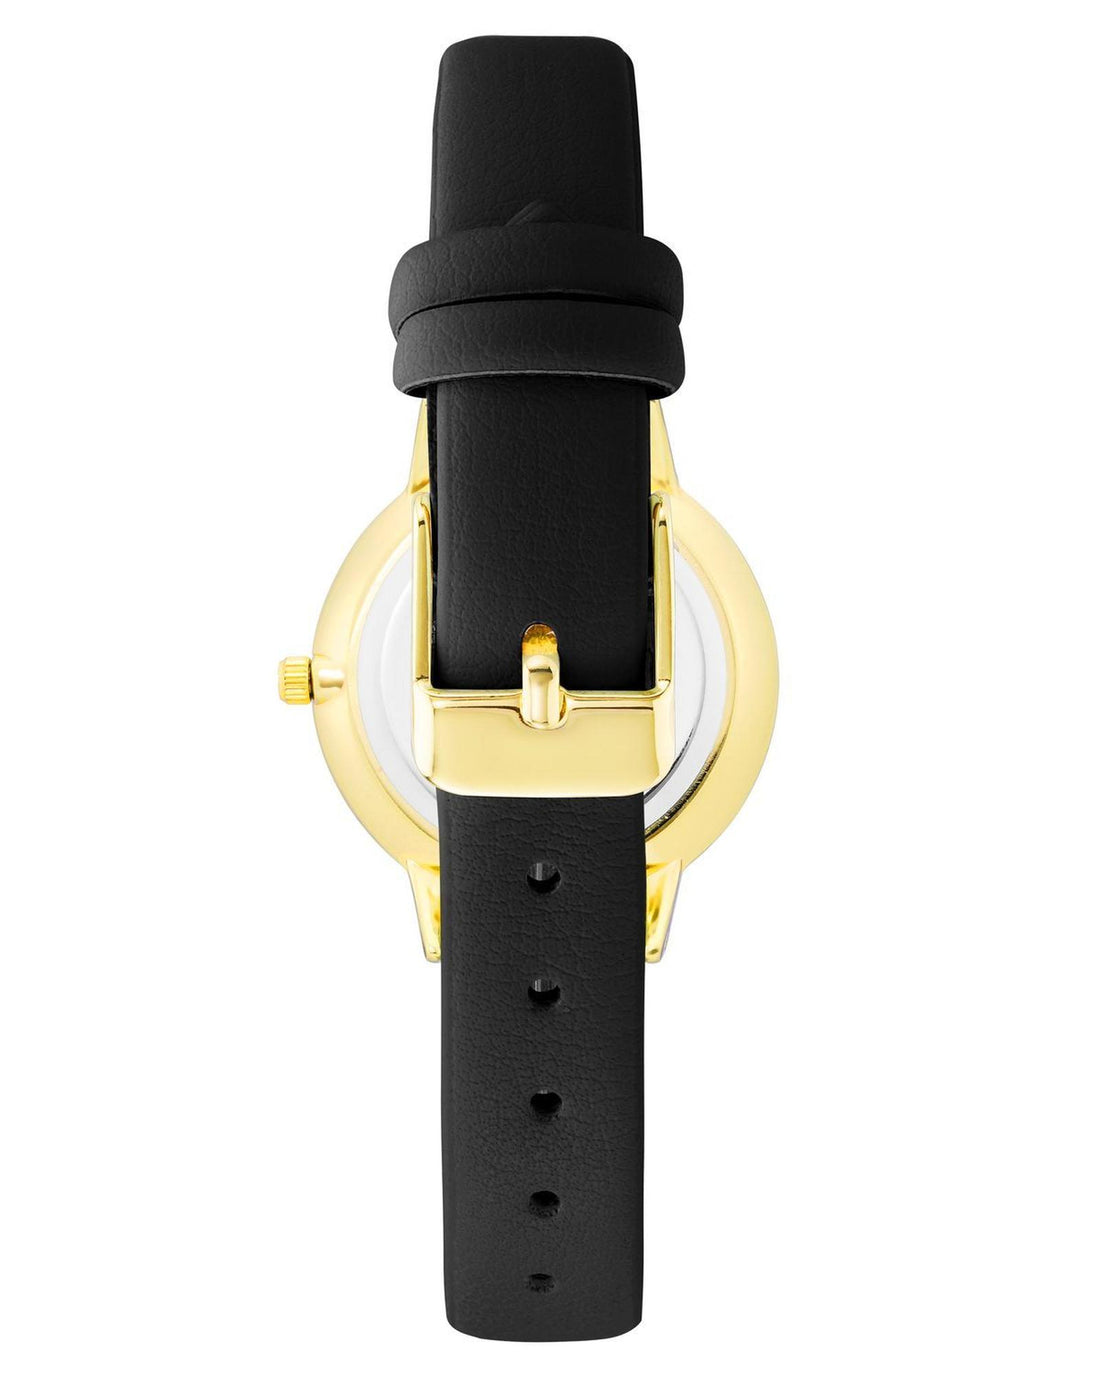 Gold Fashion Analog Womens Watch with Quartz Movement and Leatherette Strap One Size Women-Women&